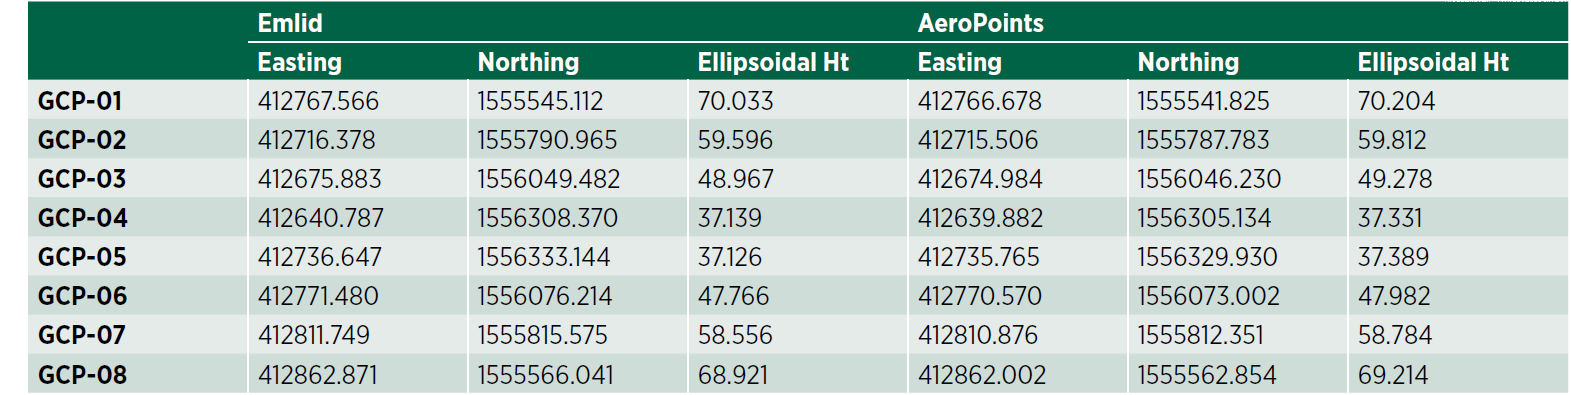 Table 4 - Emlid Reach and AeroPoint coordinates